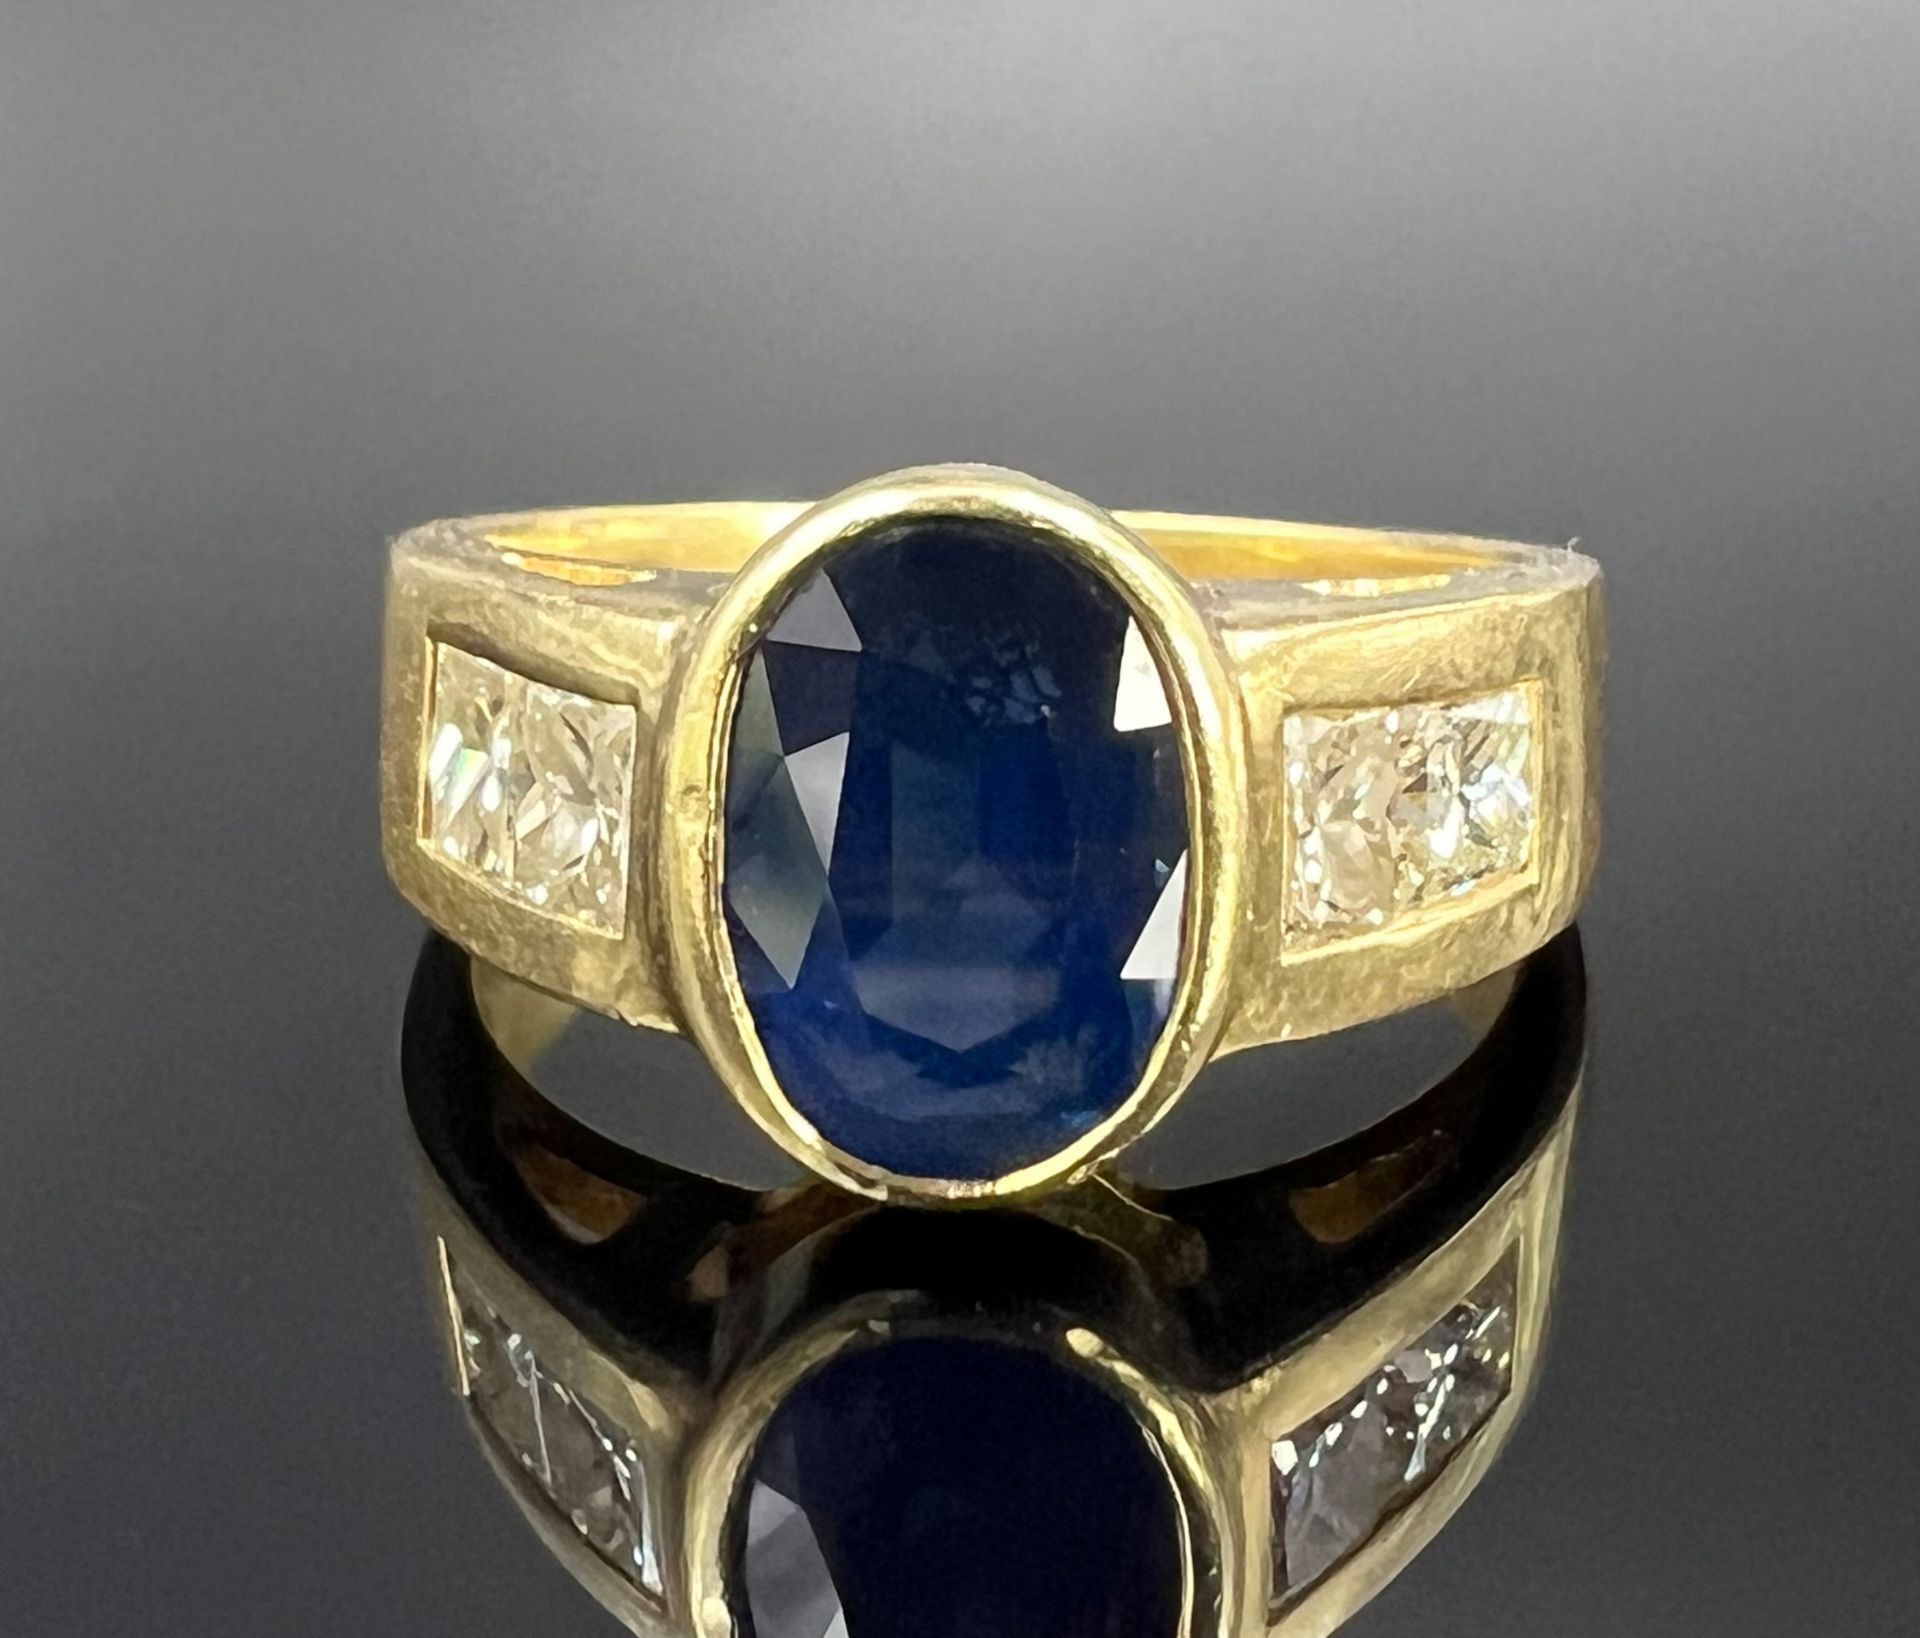 Ladies' ring. 750 yellow gold. 1 blue colored stone and 4 diamonds. - Image 2 of 10